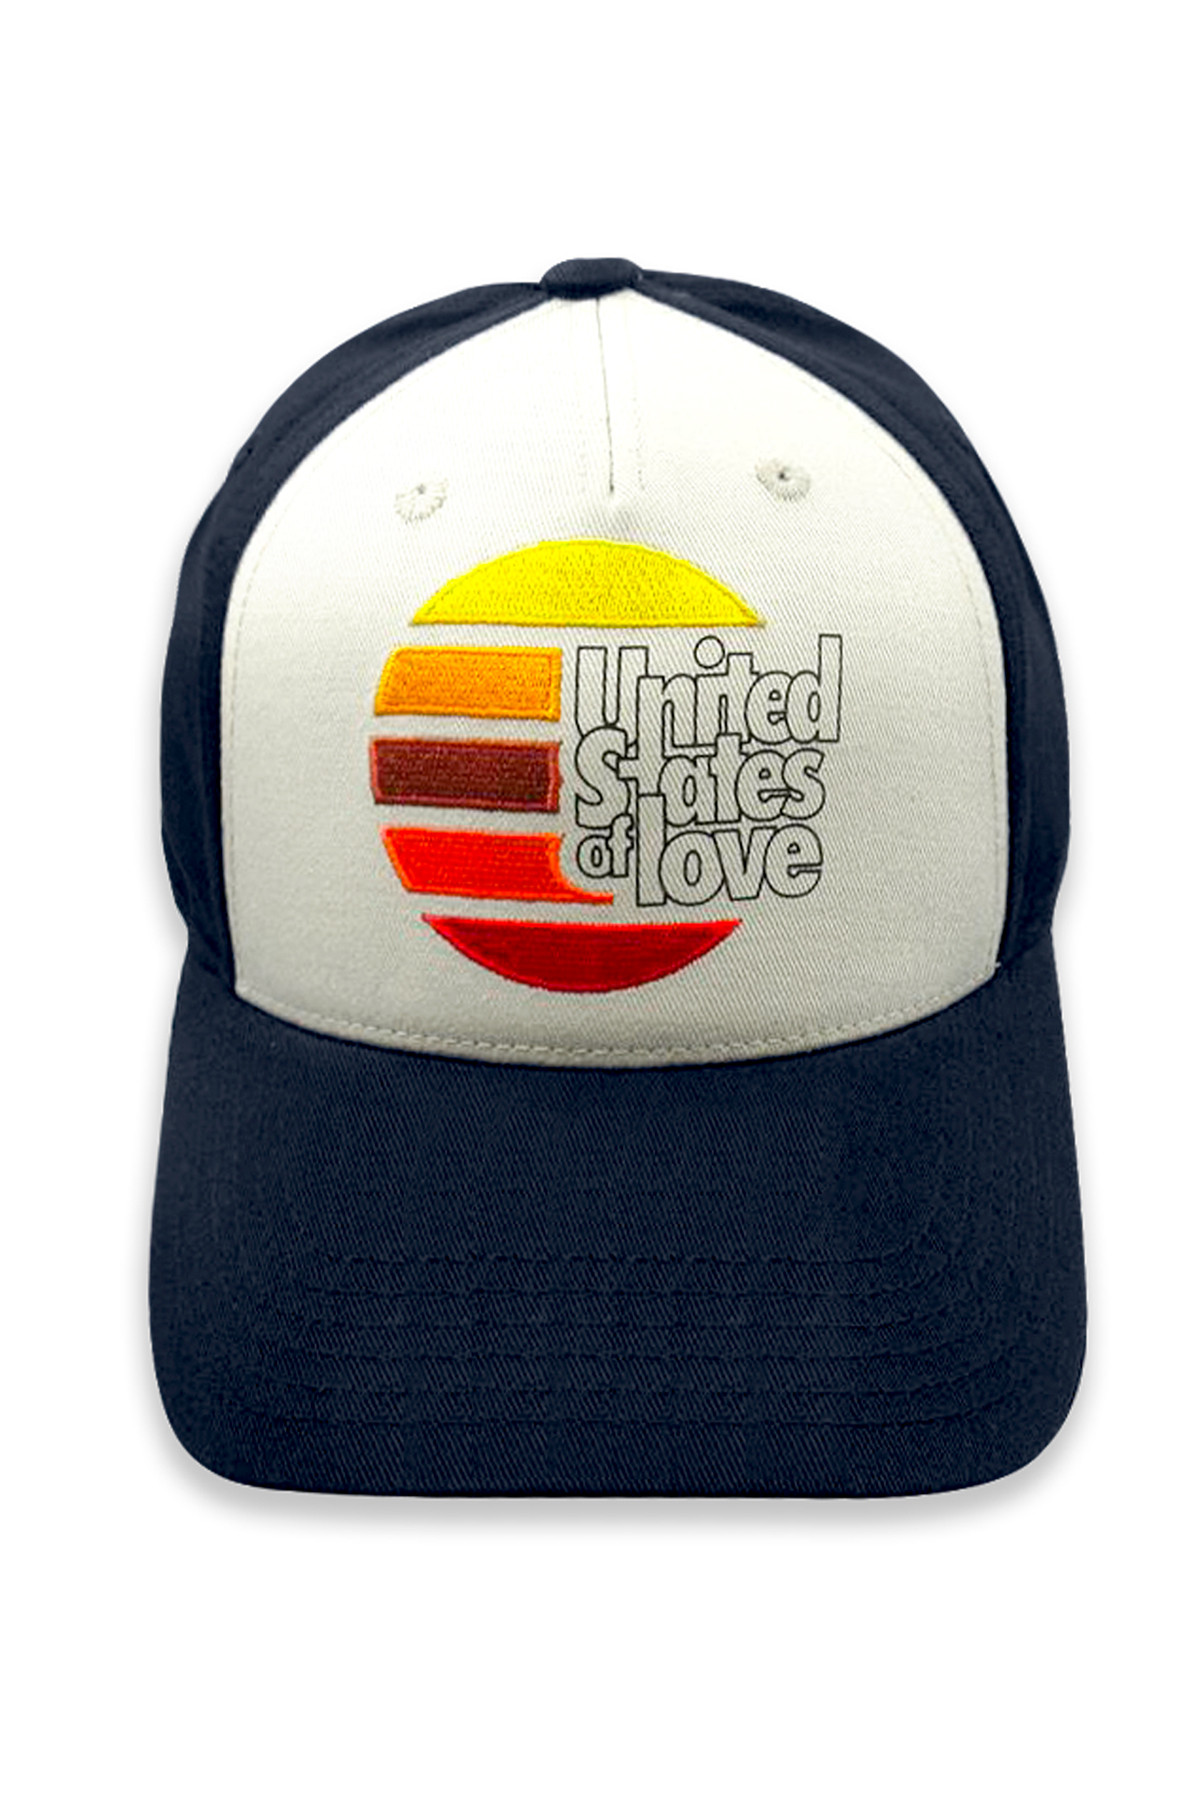 Photo de HOMME Casquette UNITED STATES OF LOVE chez French Disorder